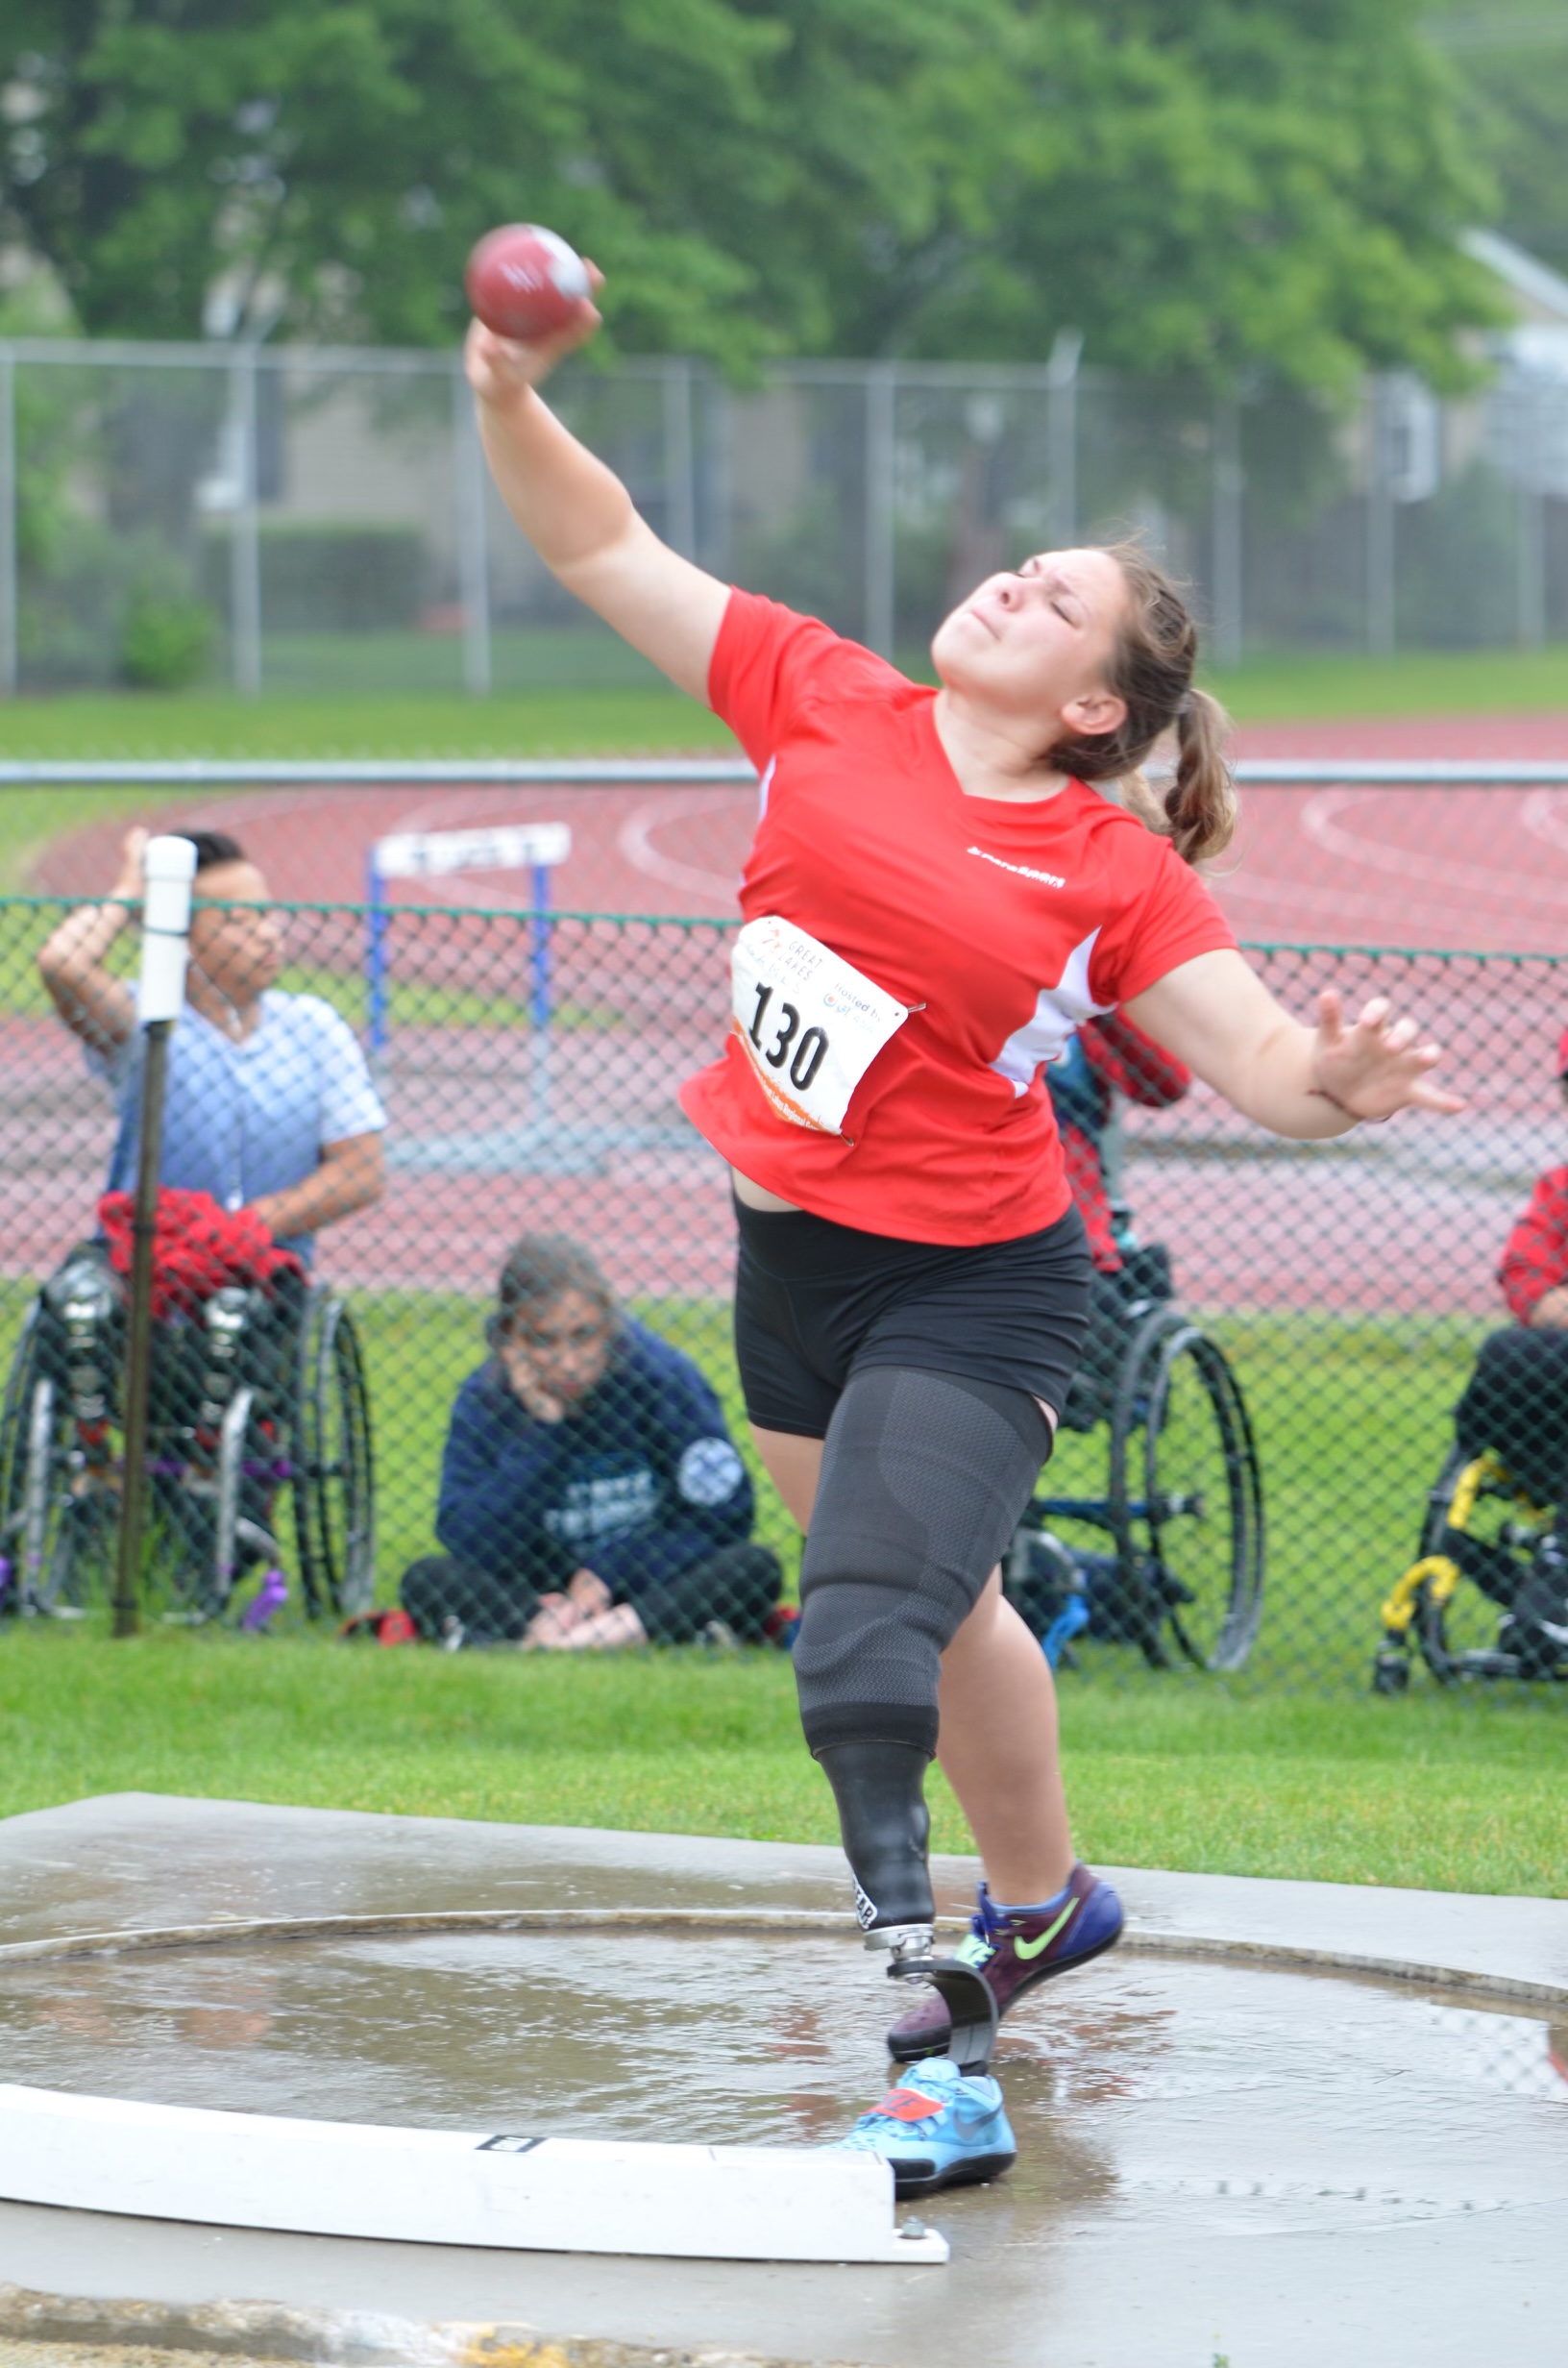 Female athlete with left leg below the knee amputation wearing a red shirt and throwing a ball